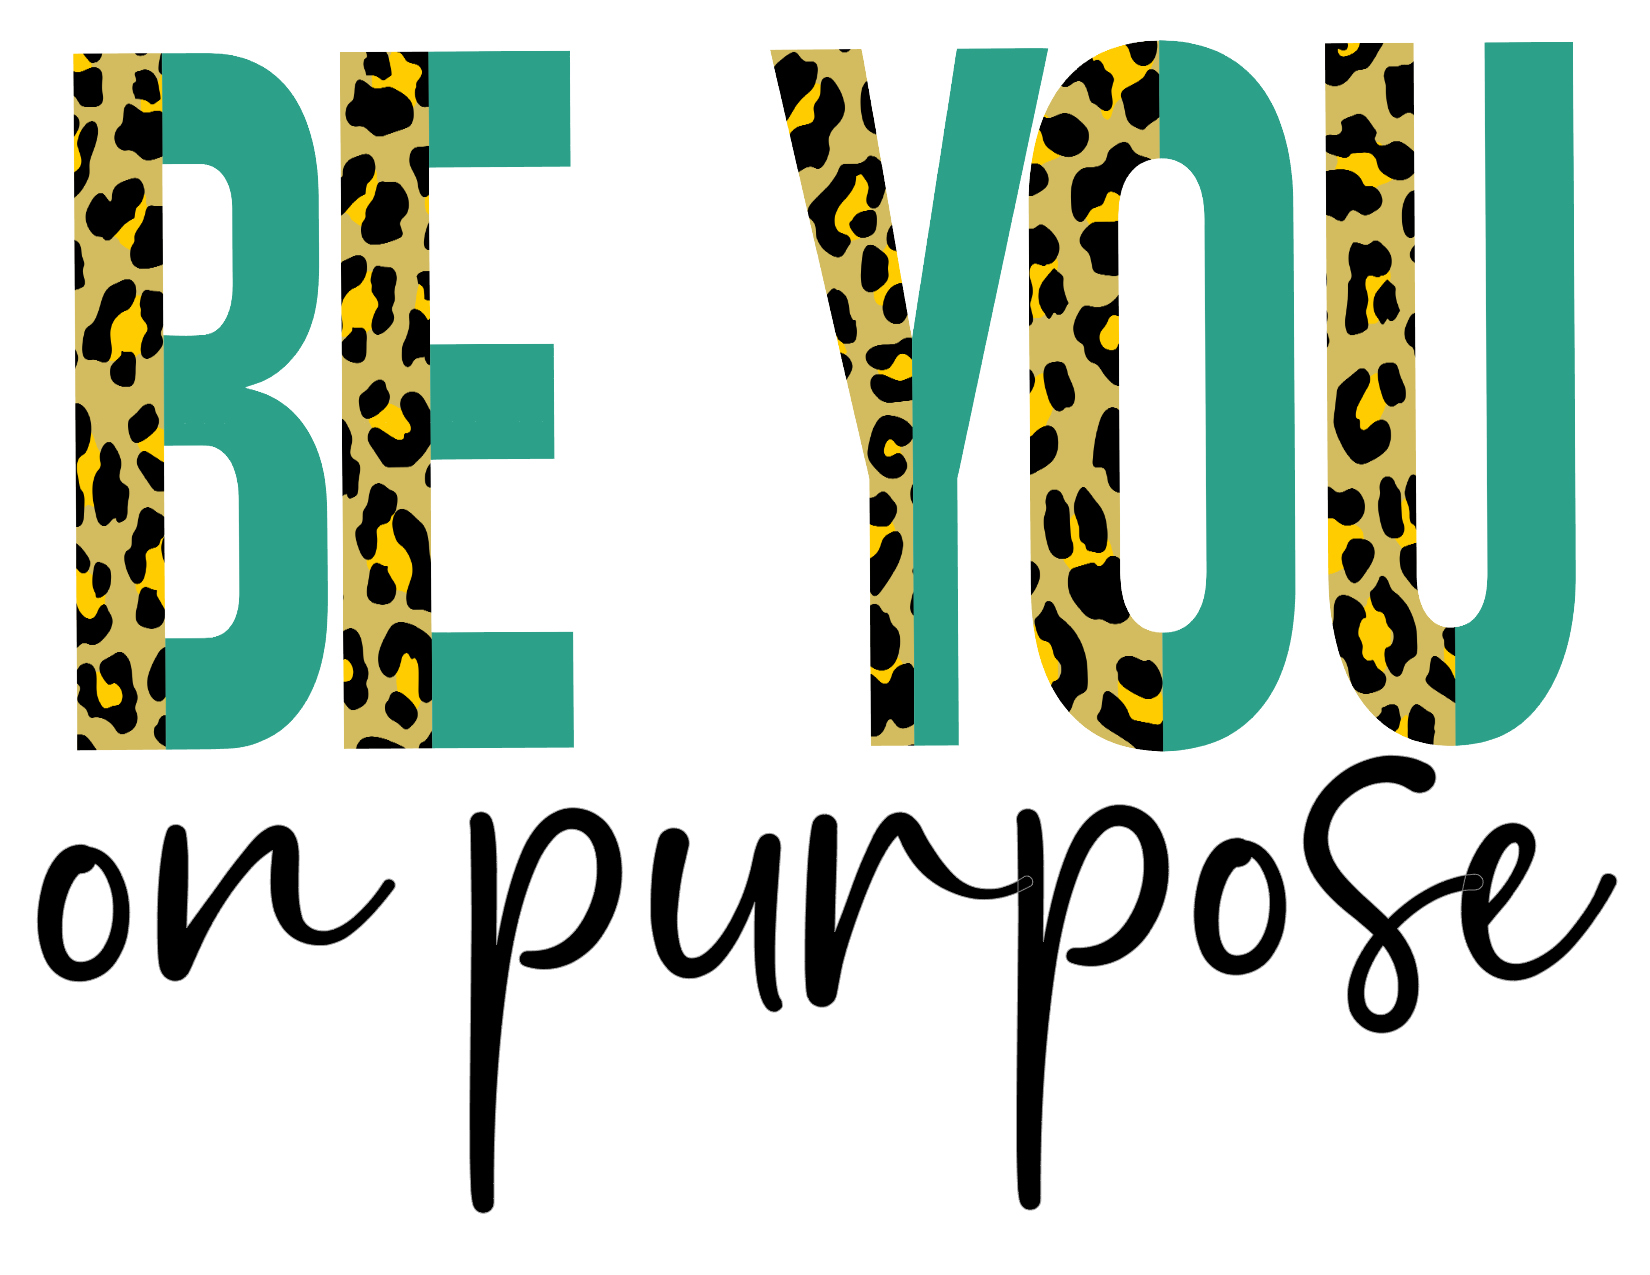 #15 Be You on purpose